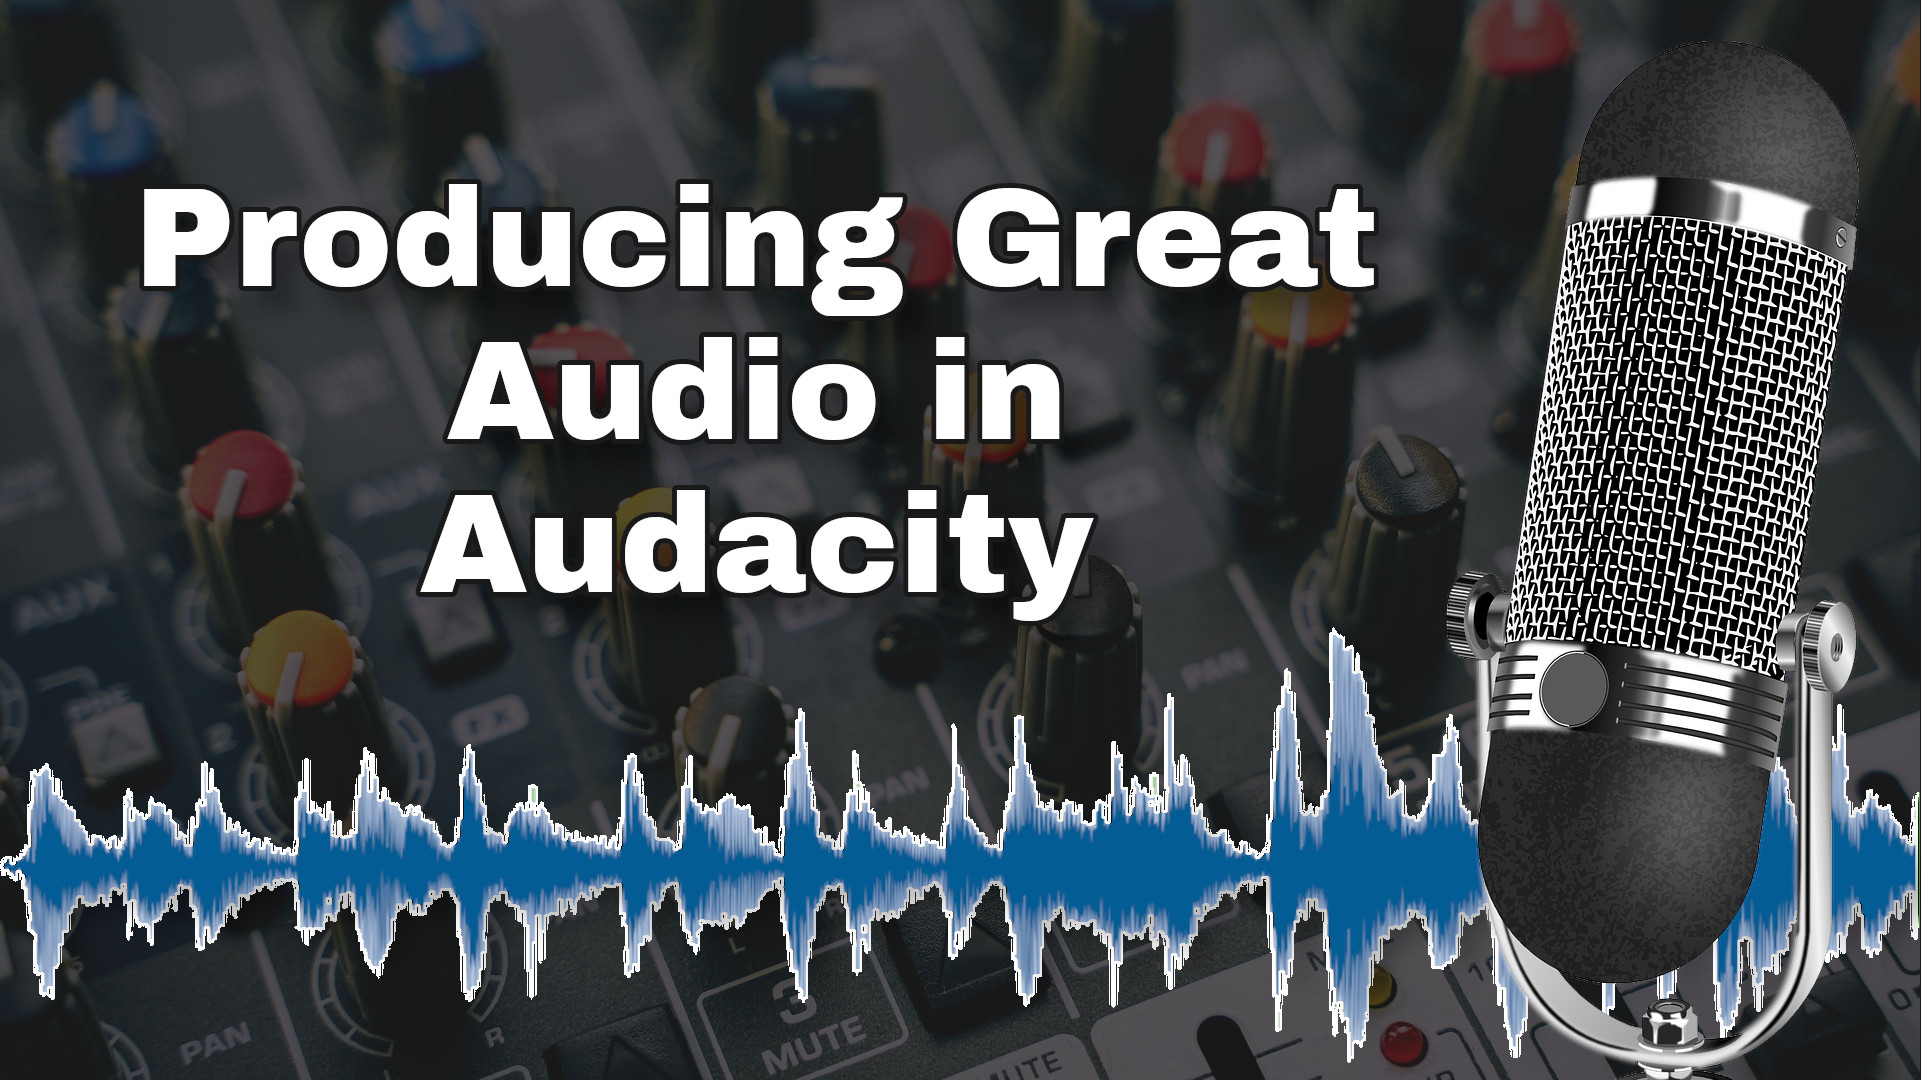 Image of a mixing console with a voice meter and microphone with the text 'Producing Great Audio in Audacity'